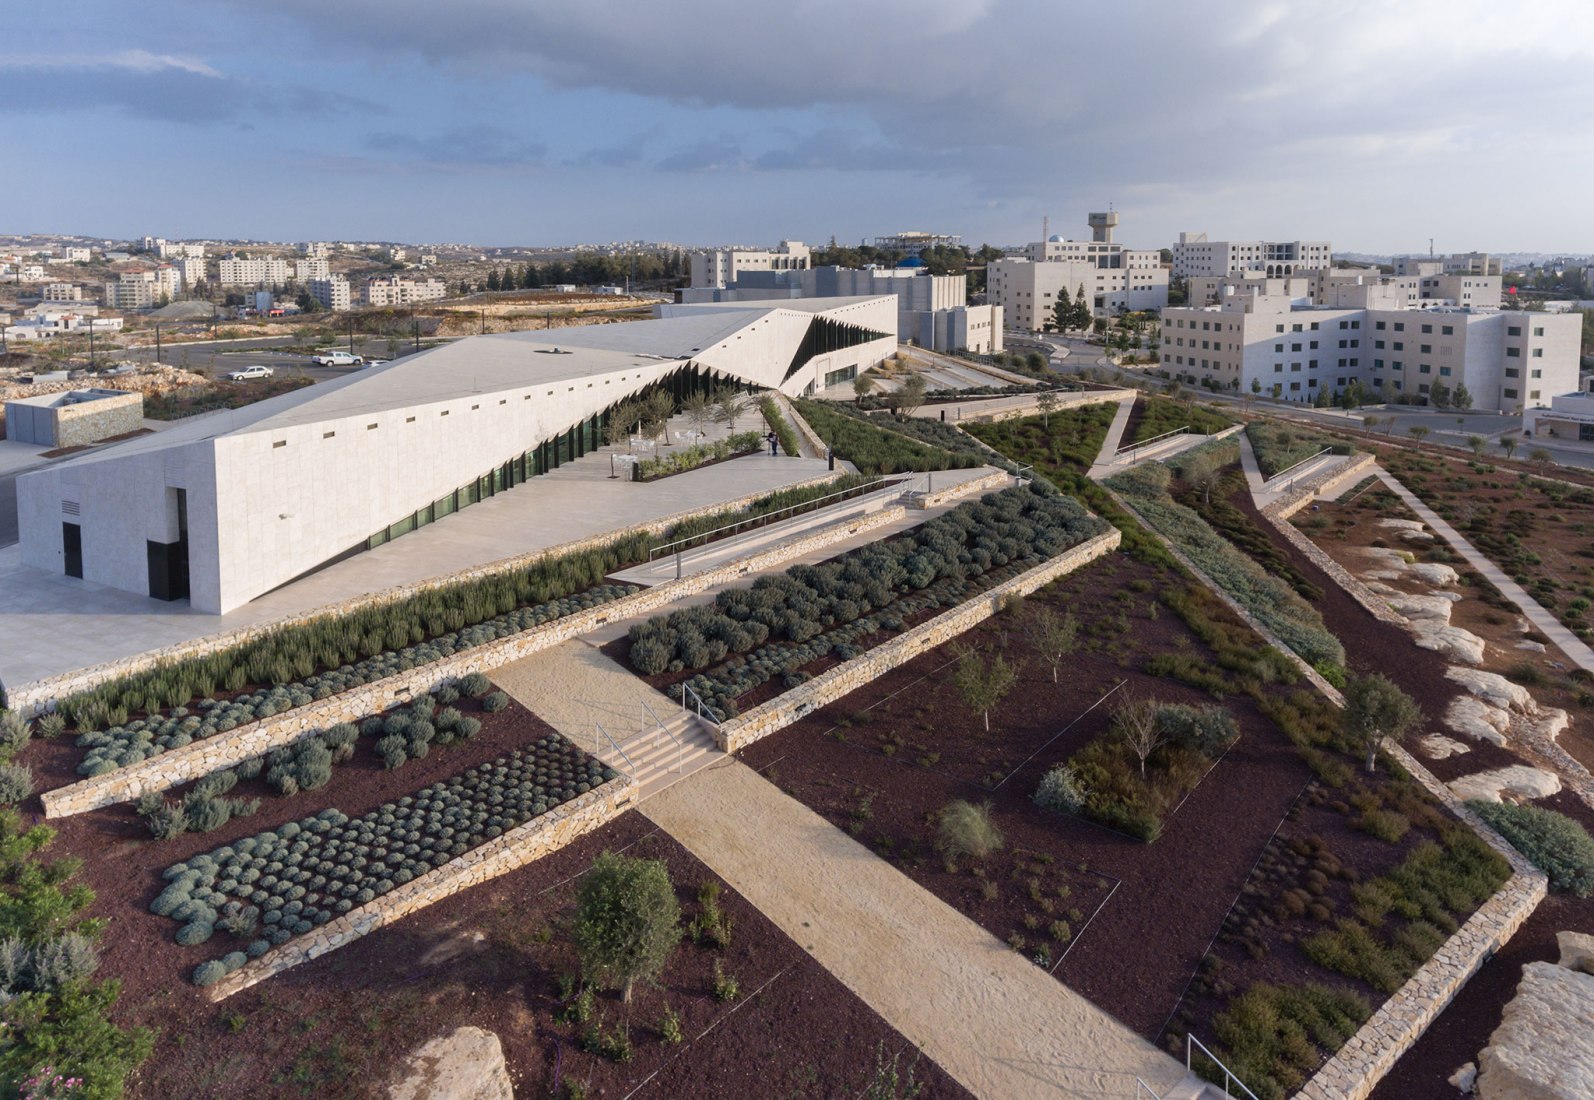 Overview. The Palestinian Museum by Heneghan Peng Arquitects. Birzeit, Palestine. Photograpy © Iwan Baan. Image courtesy of Heneghan Peng Arquitects.